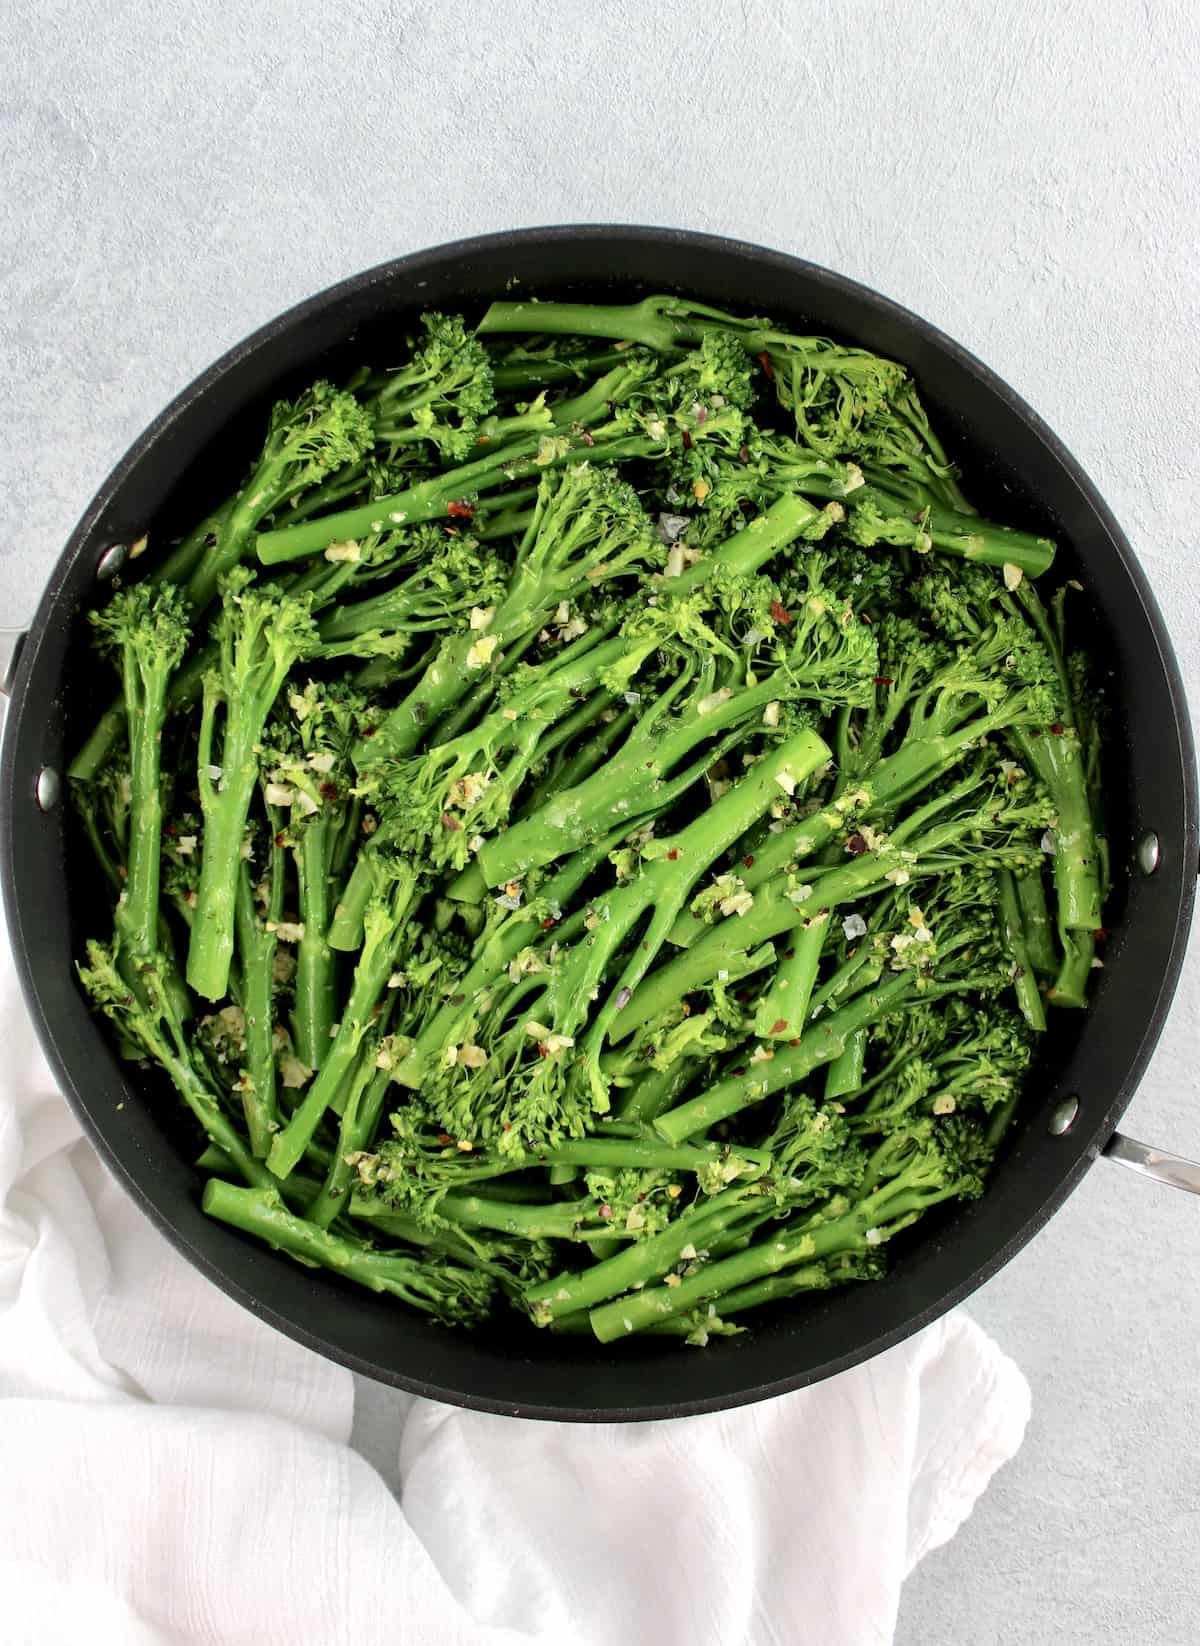 Sautéed Broccolini with Garlic in skillet